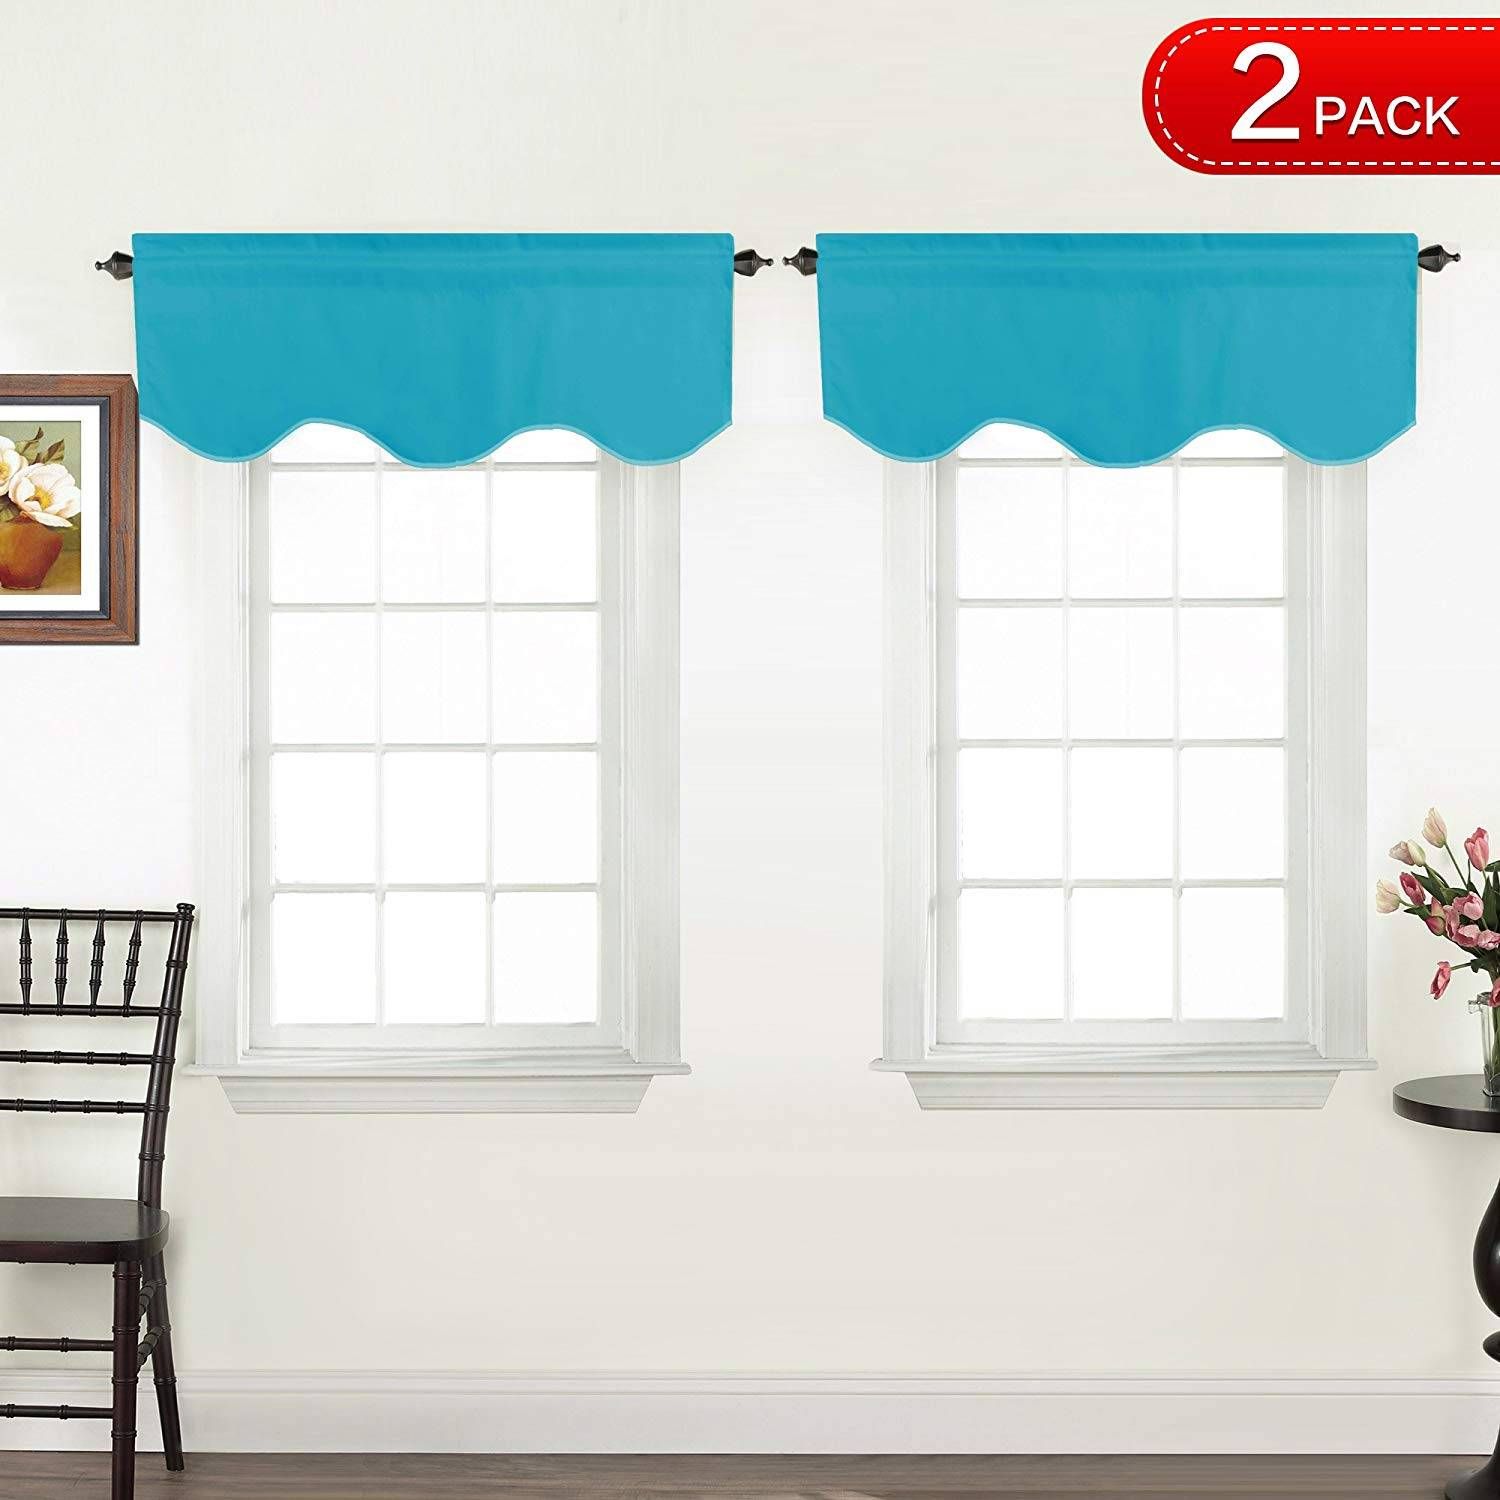 Modern Kitchen Valance Curtains Ideas Farmhouse Mid Century Pertaining To Luxurious Kitchen Curtains Tiers, Shade Or Valances (View 16 of 20)